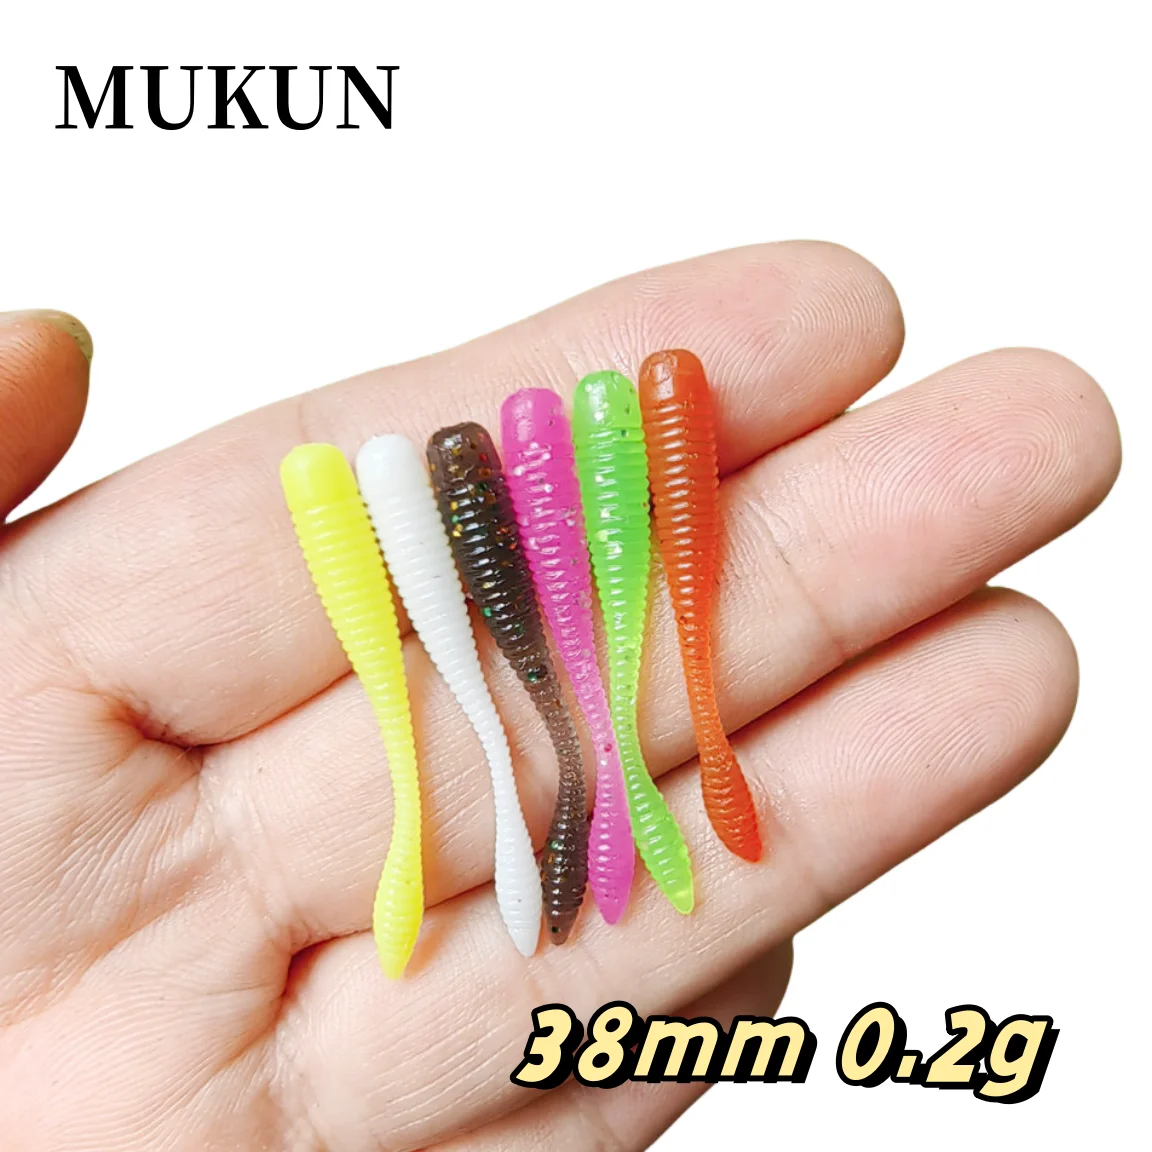 

MUKUN Ajing Soft Fishing Lure Worm 38mm 0.2g TPR Plastic Bait For Saltwater Freshwater Walleye Trout Bass